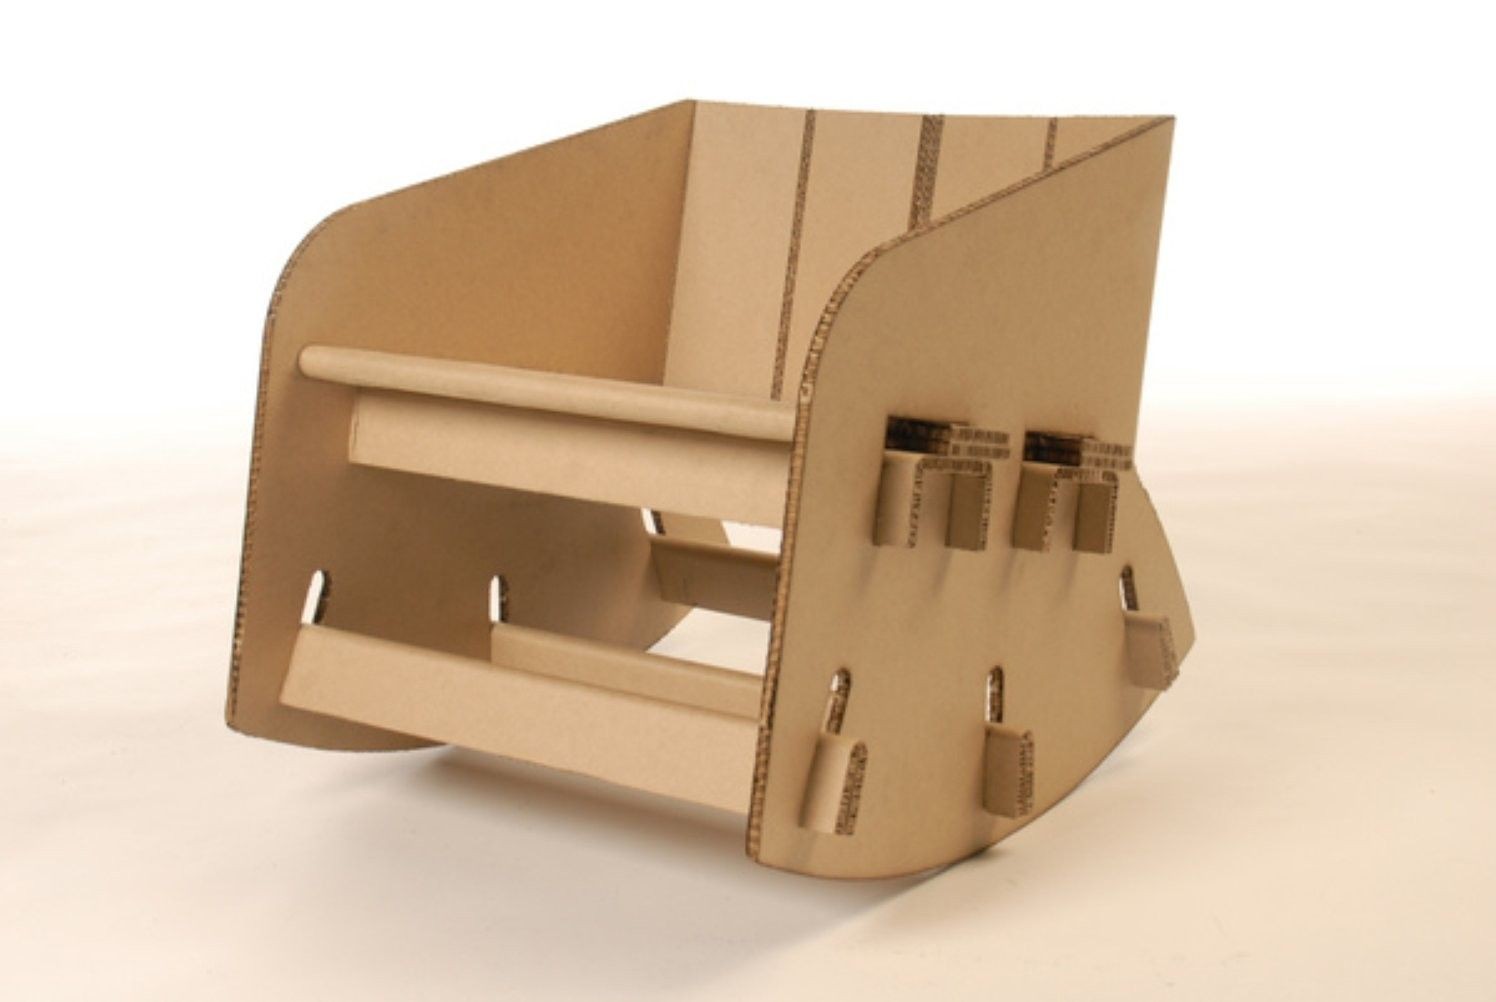 Papercraft Furniture 14 Pieces Cardboard Furniture You Can Make at Home Bored